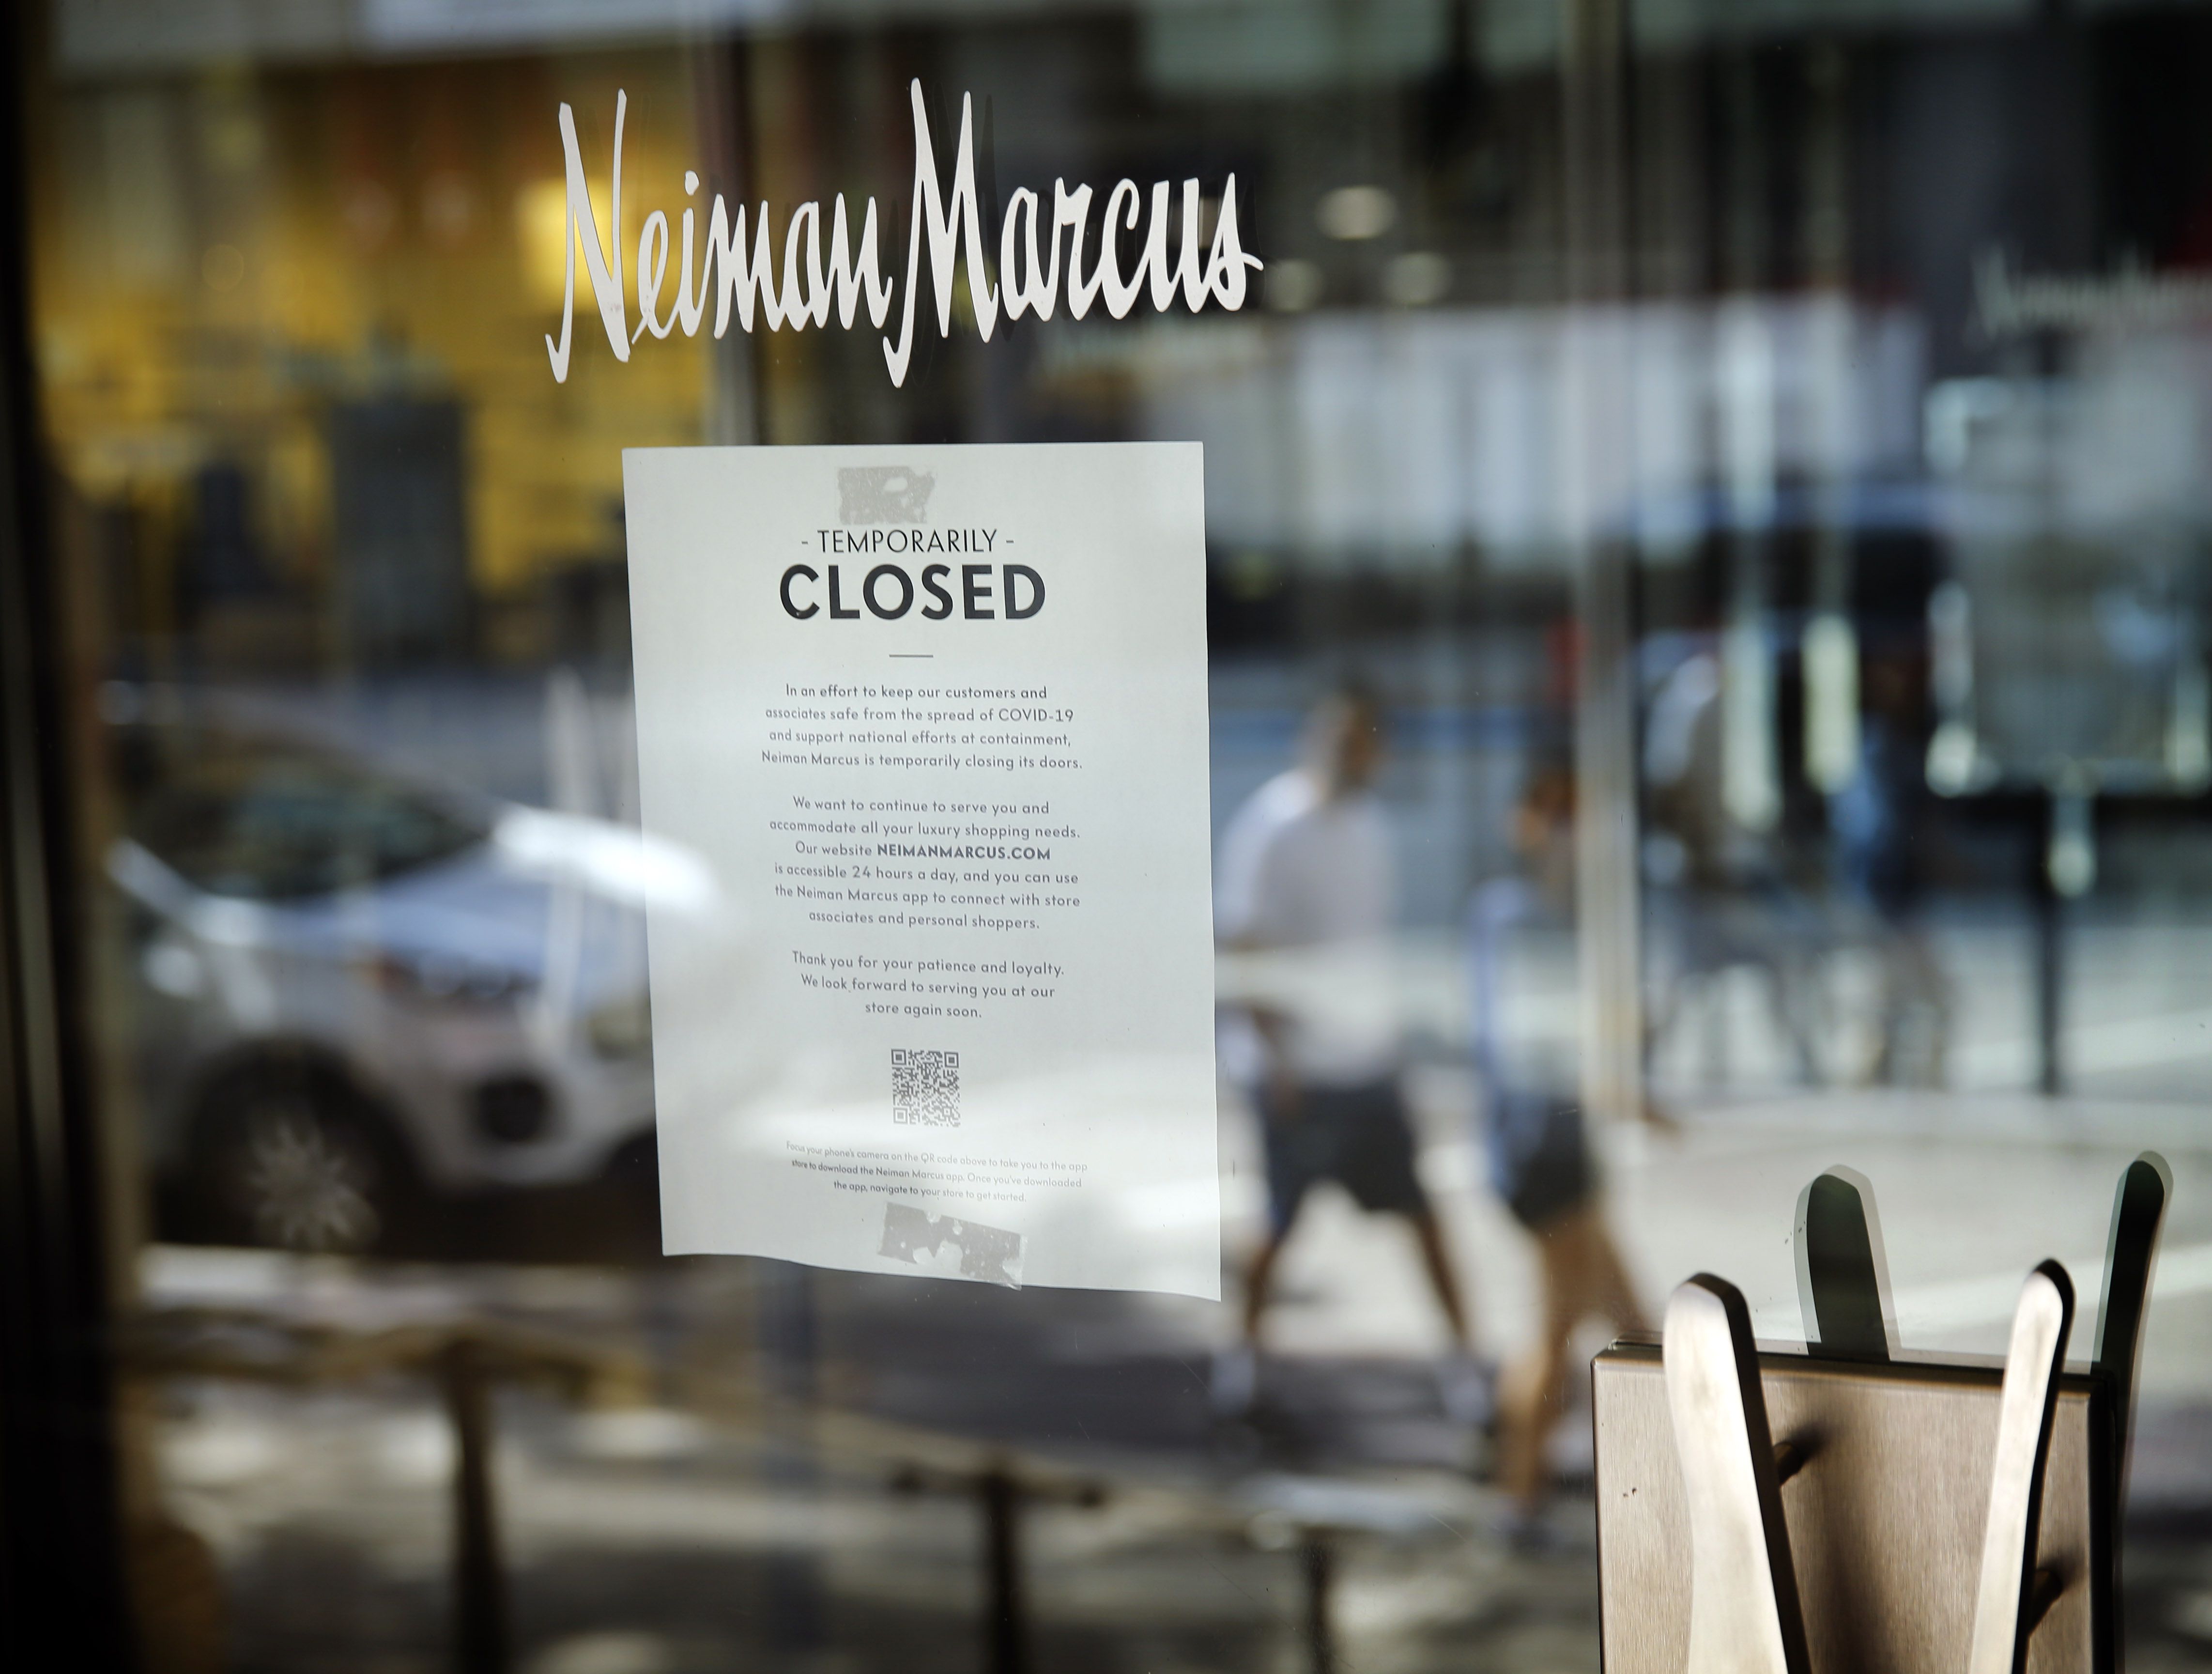 Judge approves crucial $675 million bankruptcy financing for Neiman Marcus